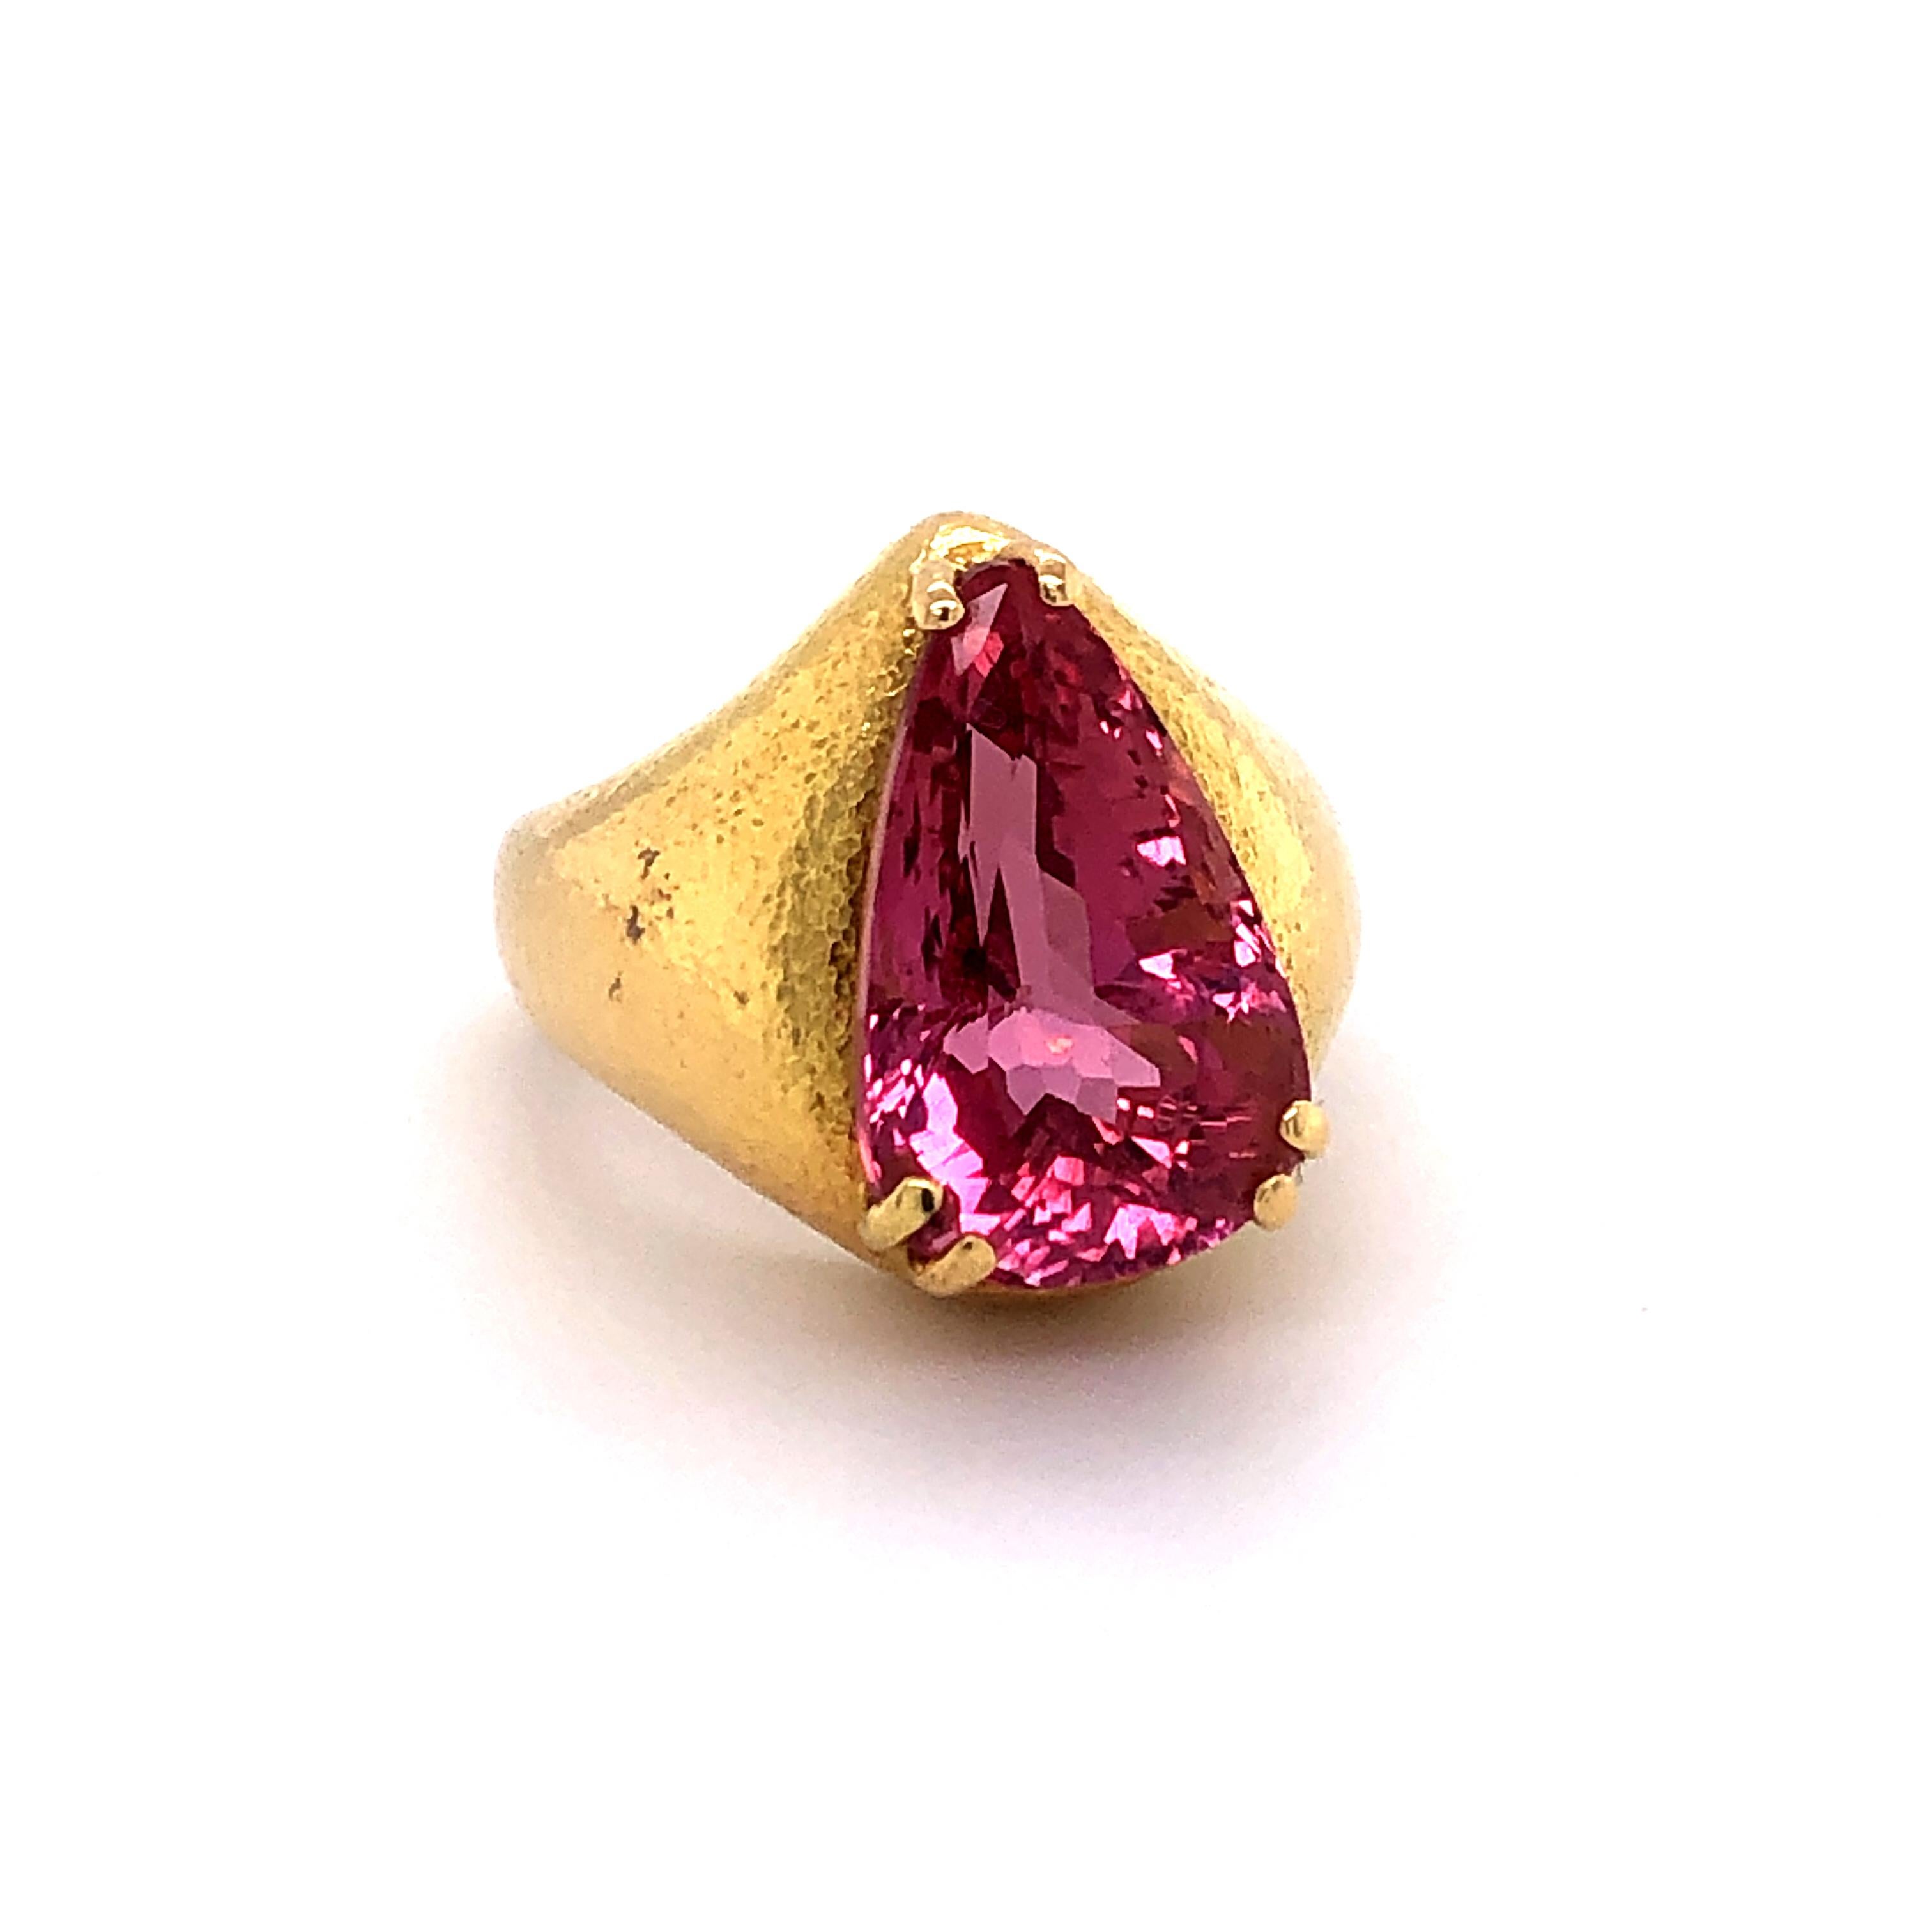 This beautifully handcrafted and hammered ring in 18 karat yellow gold features an intensely colored pear shaped pink topaz. The superbly cut topaz weighs approximately 8.00 carats.

SIze: 51 (EU), 5 3/4 (US)
Maker's mark: JUD
Assay mark: 750